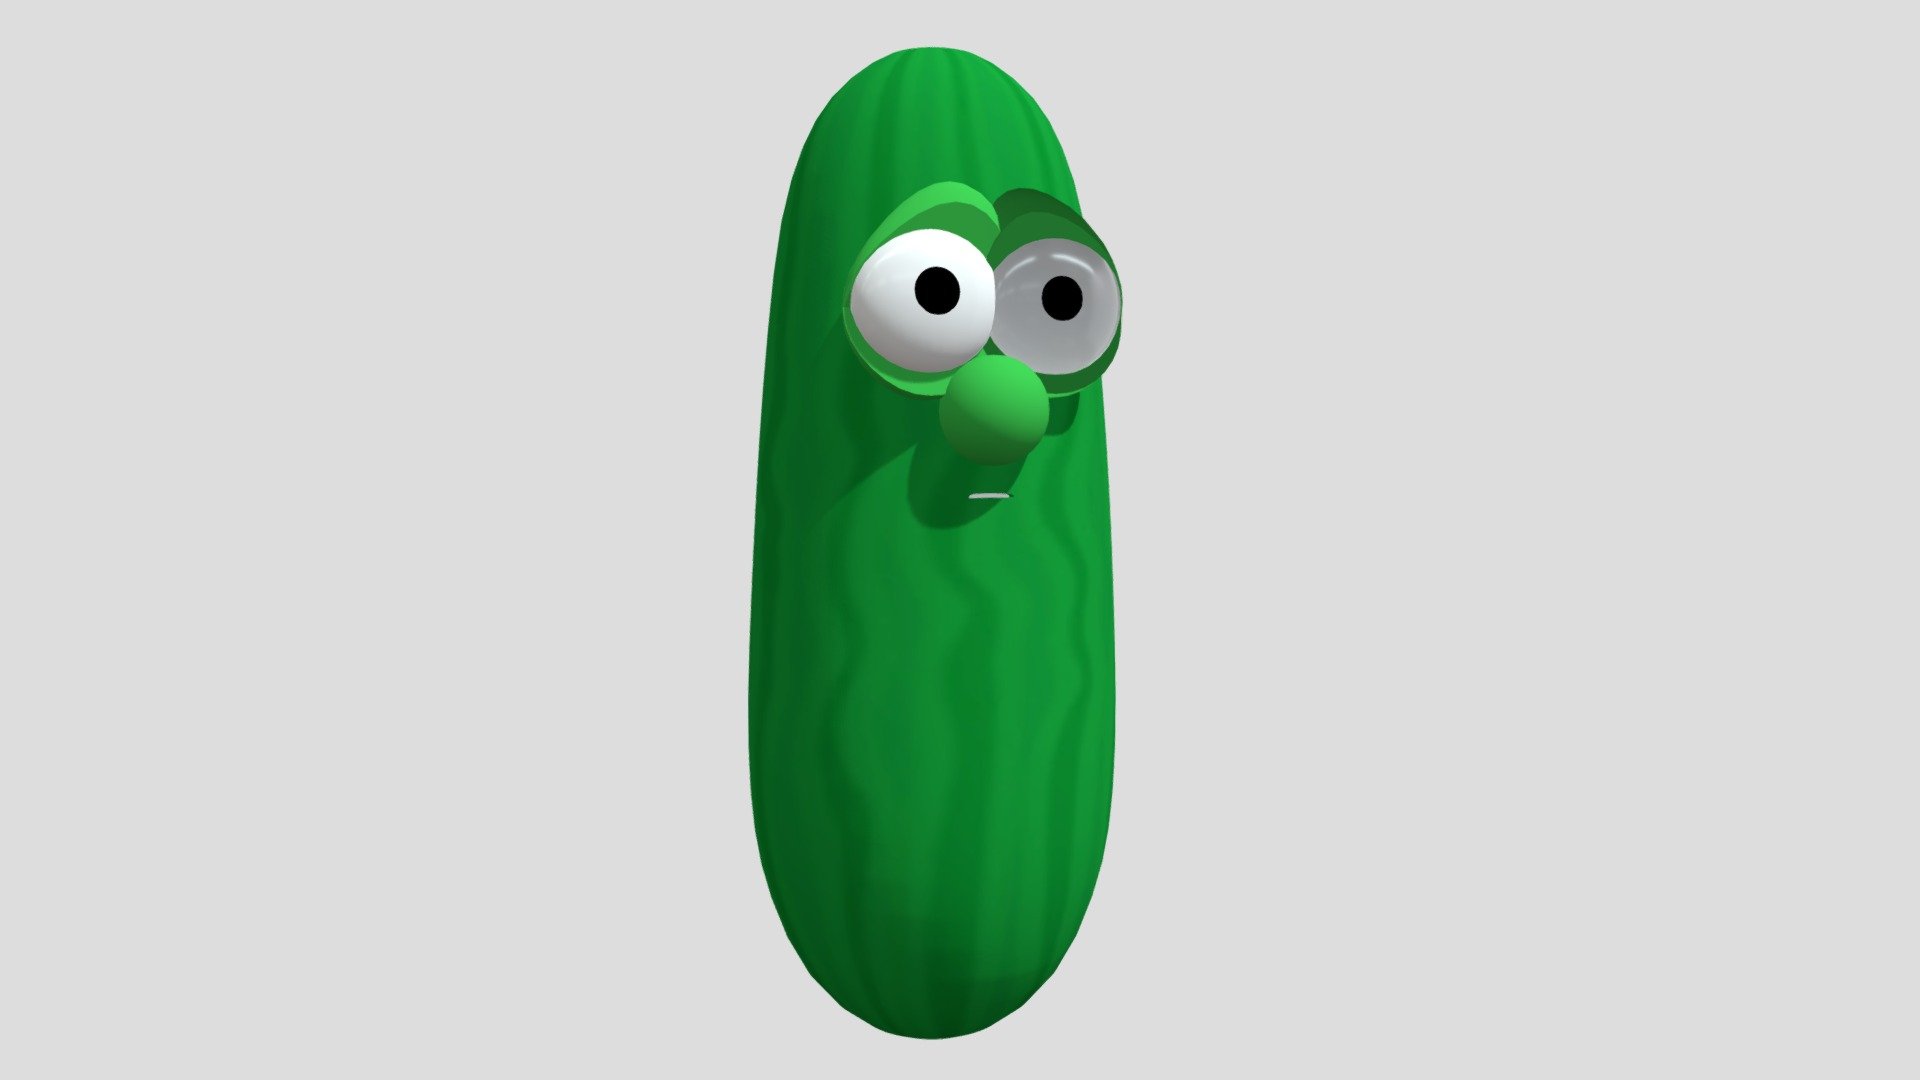 Design of Larry the Cucumber (host of VeggieTales) from early 2000.

Costumes include:

Cook Larry (seen in &ldquo;VeggieTown Values: On the Job!